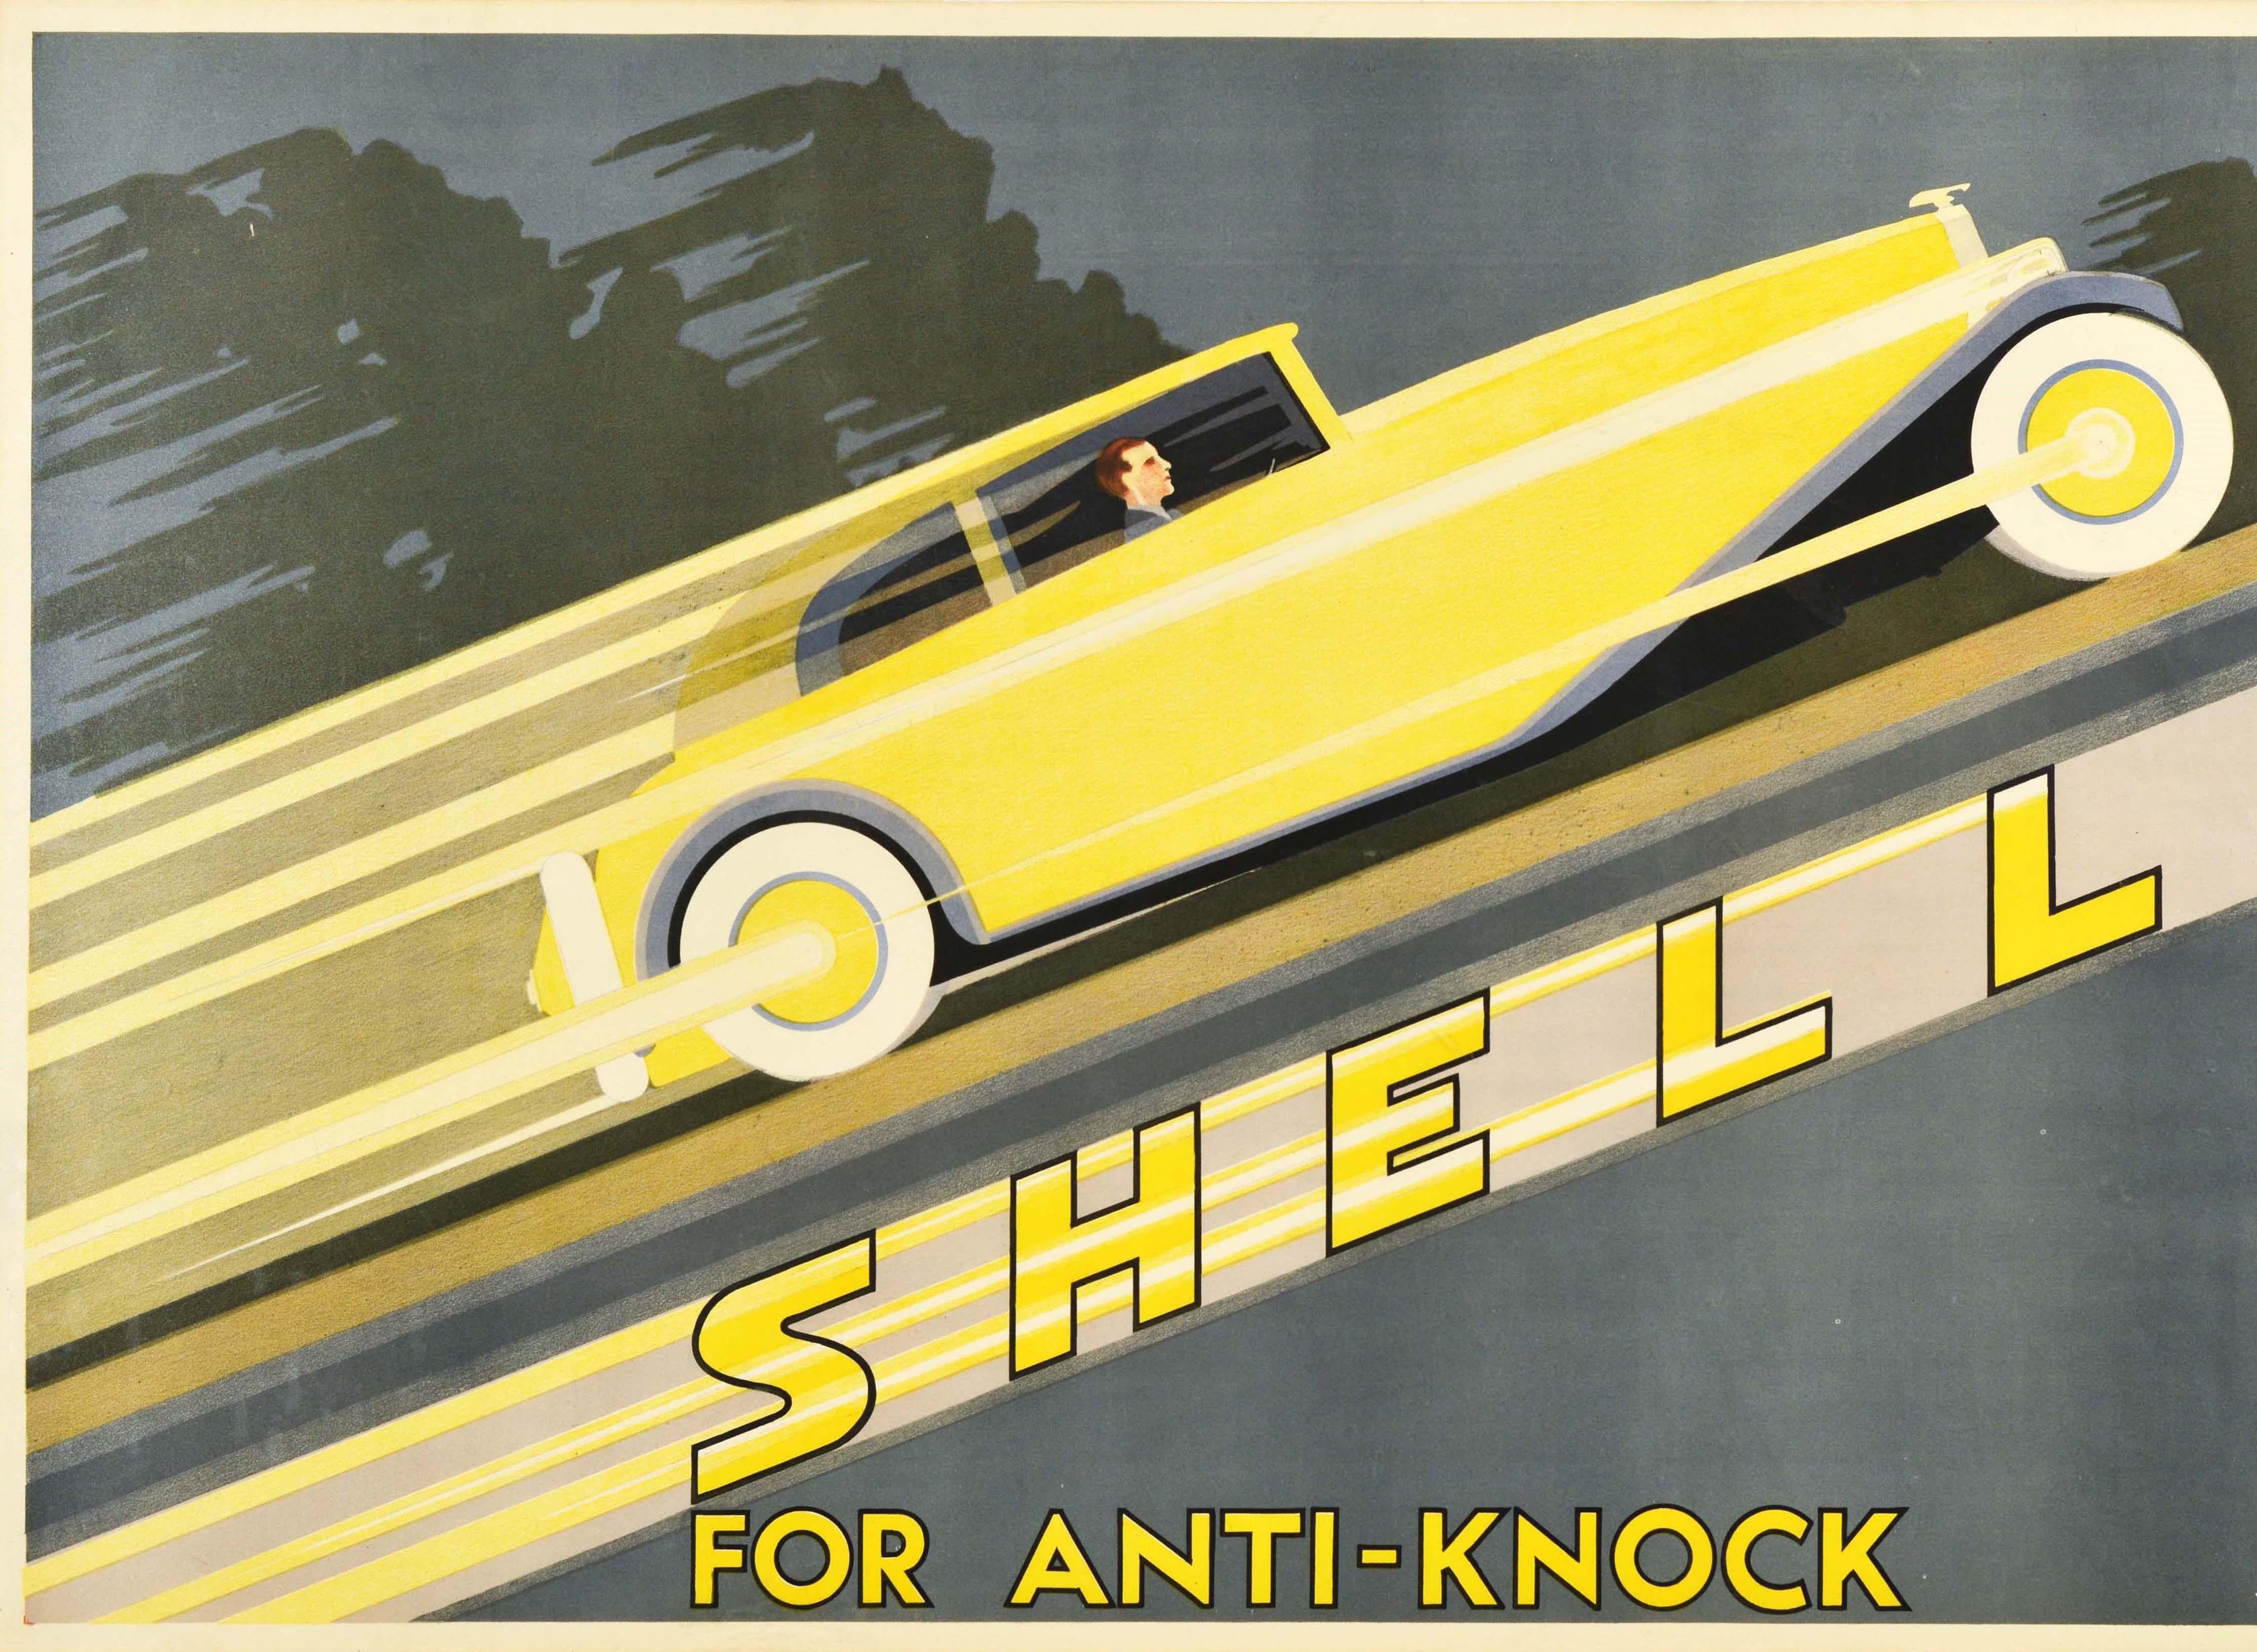 Original Vintage Advertising Poster Shell For Anti Knock Rolls Royce Classic Car - Art Deco Print by Yunge